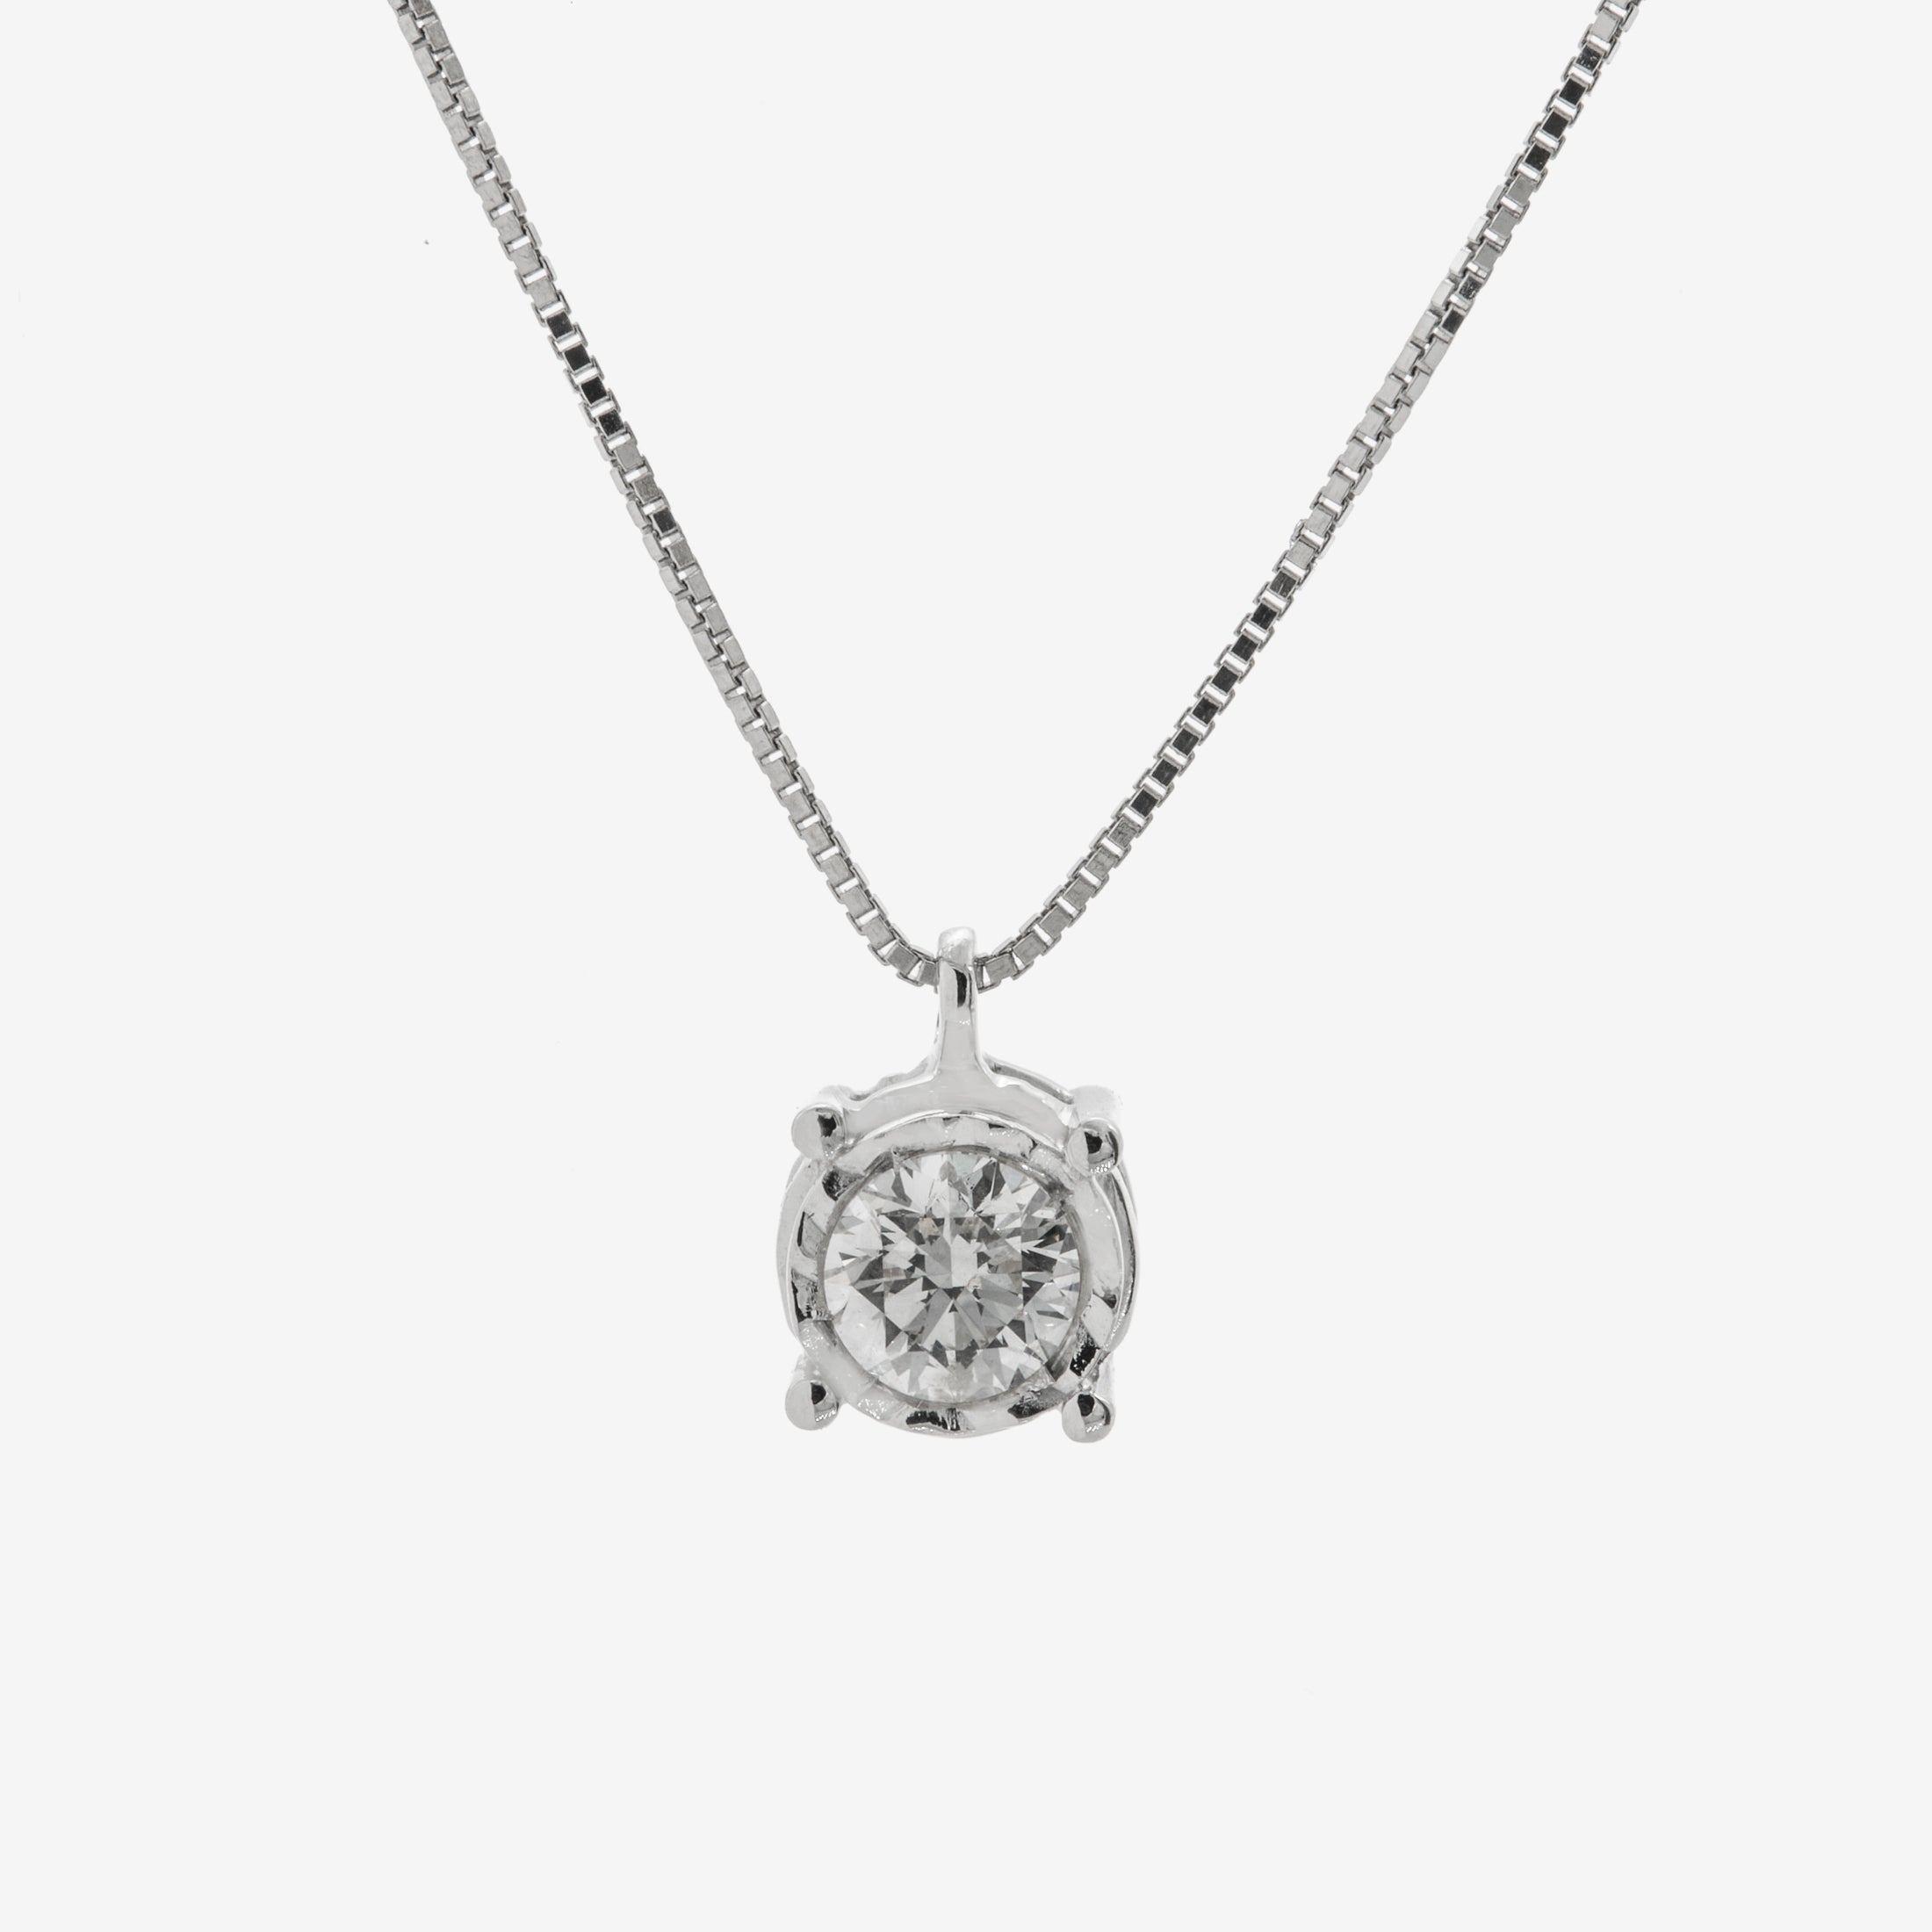 New disketto necklace with diamonds 